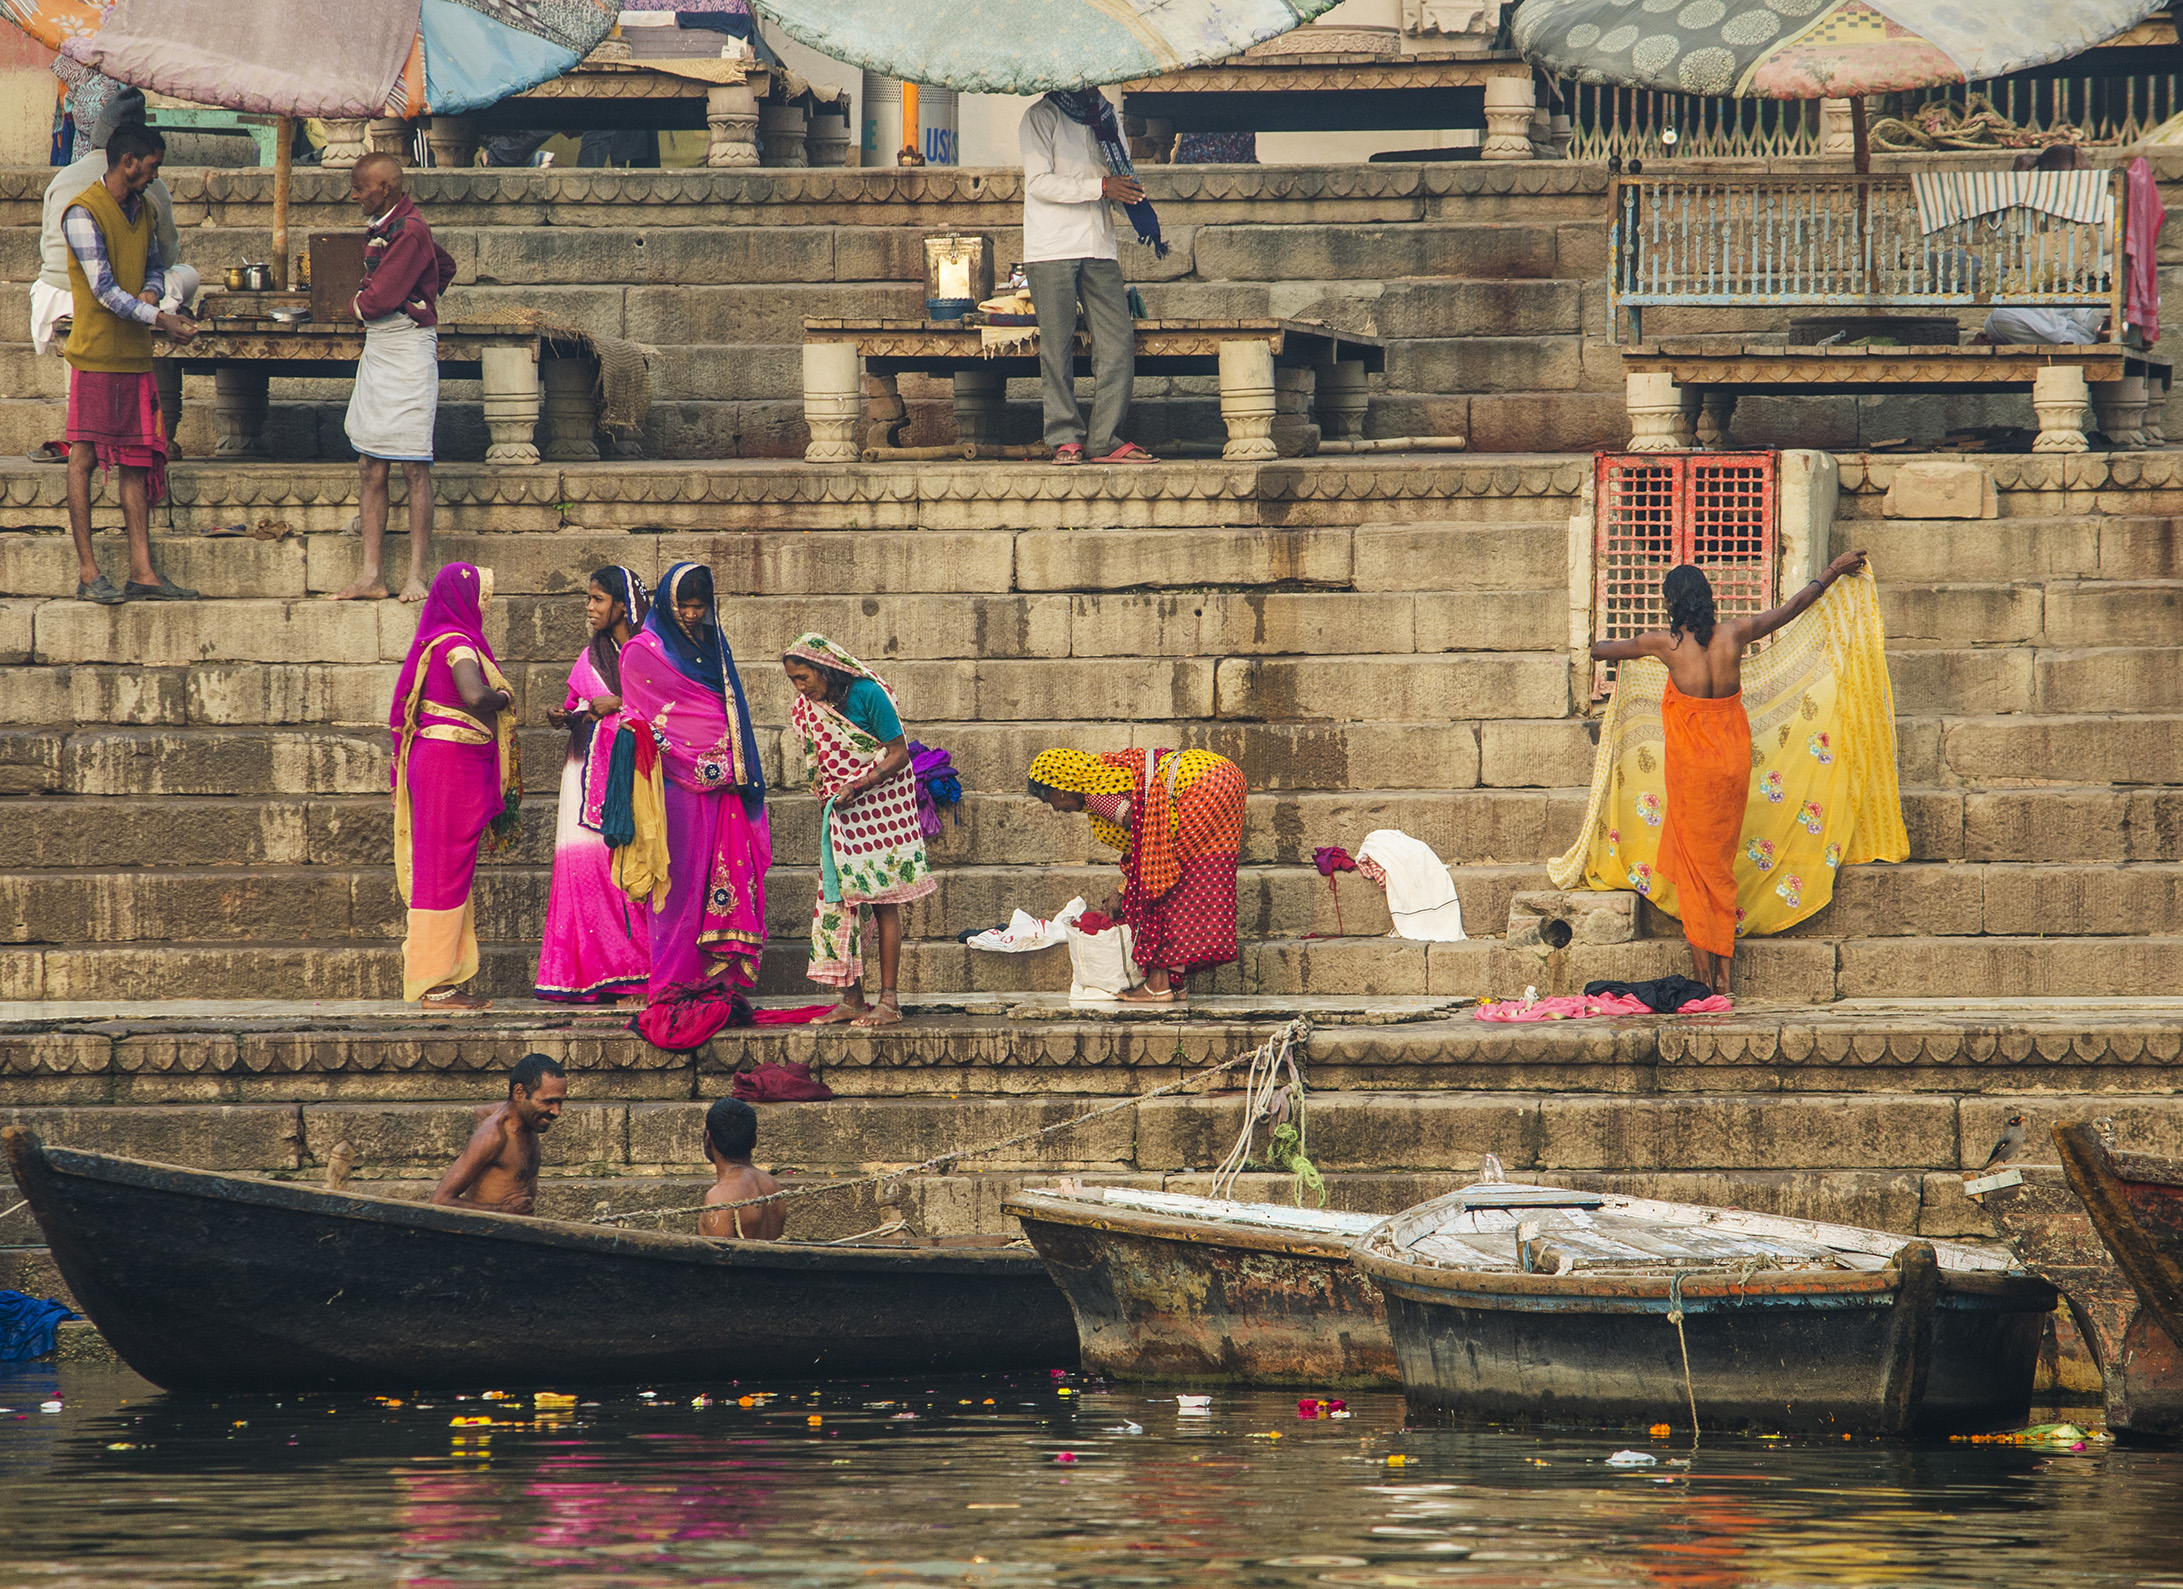 Daily morning rituals. The contrast between life and death: saris full of  life and colors, and the river where people go  to die.